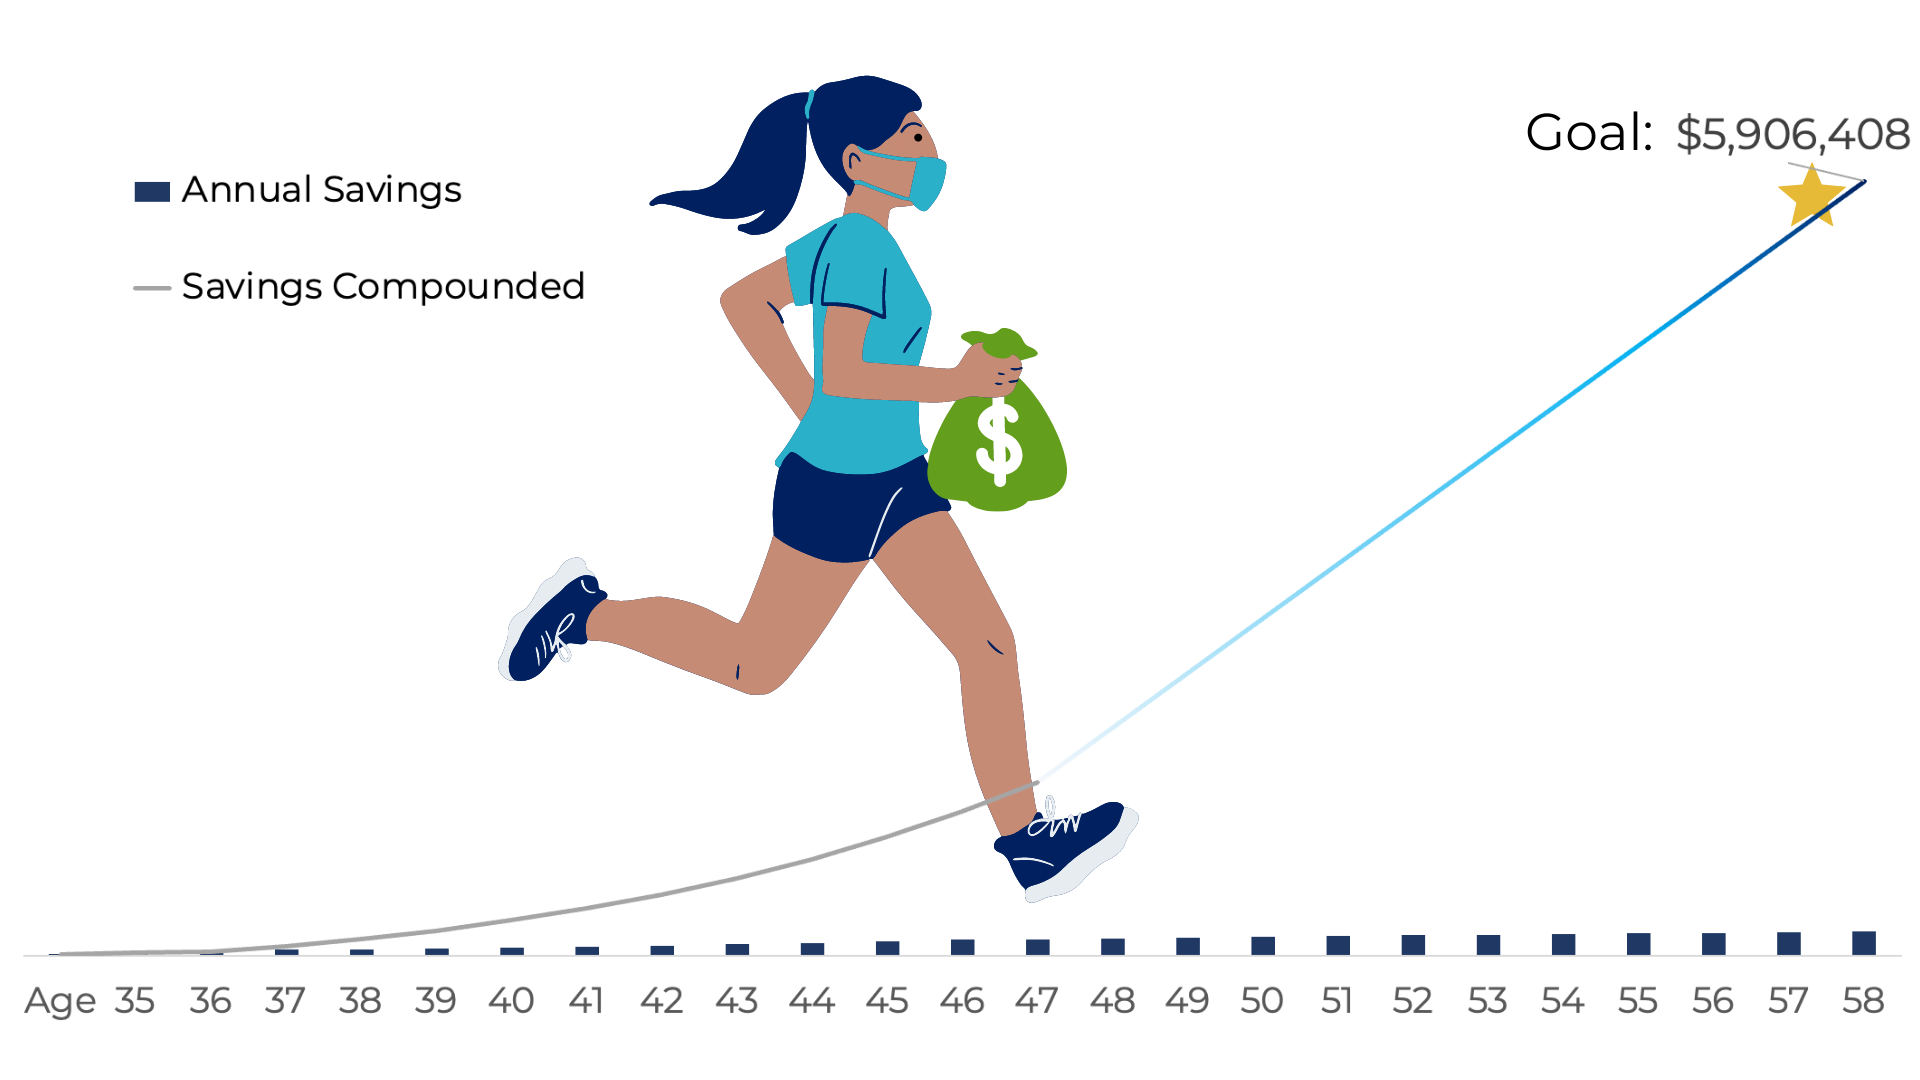 A running woman holding a bag of money tries to reach her retirement goal. A chart details her compounding savings.